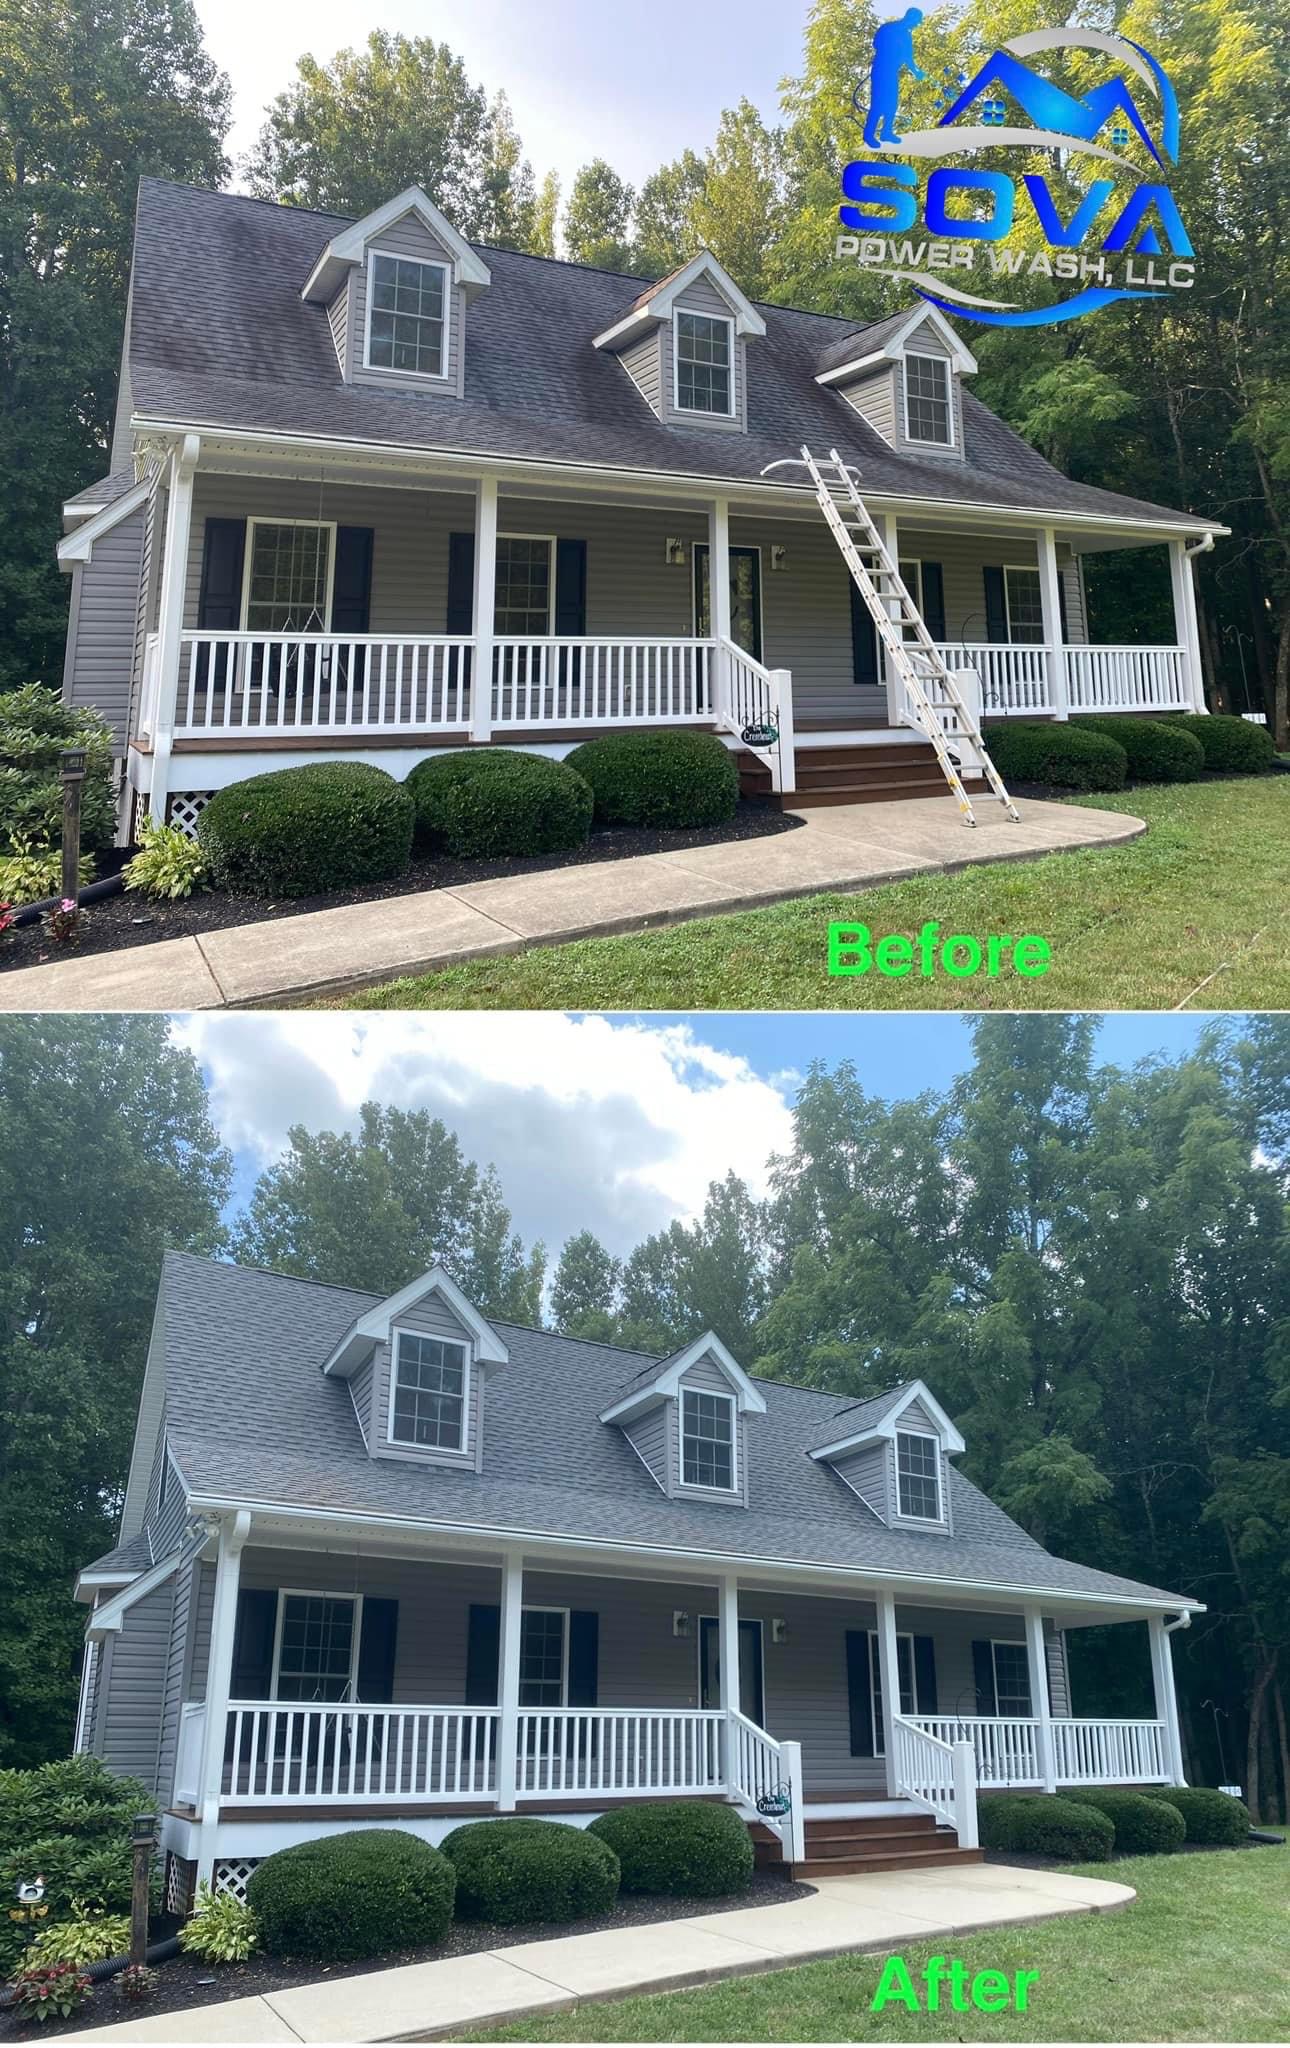 House Washing and Roof Washing in Victoria, VA